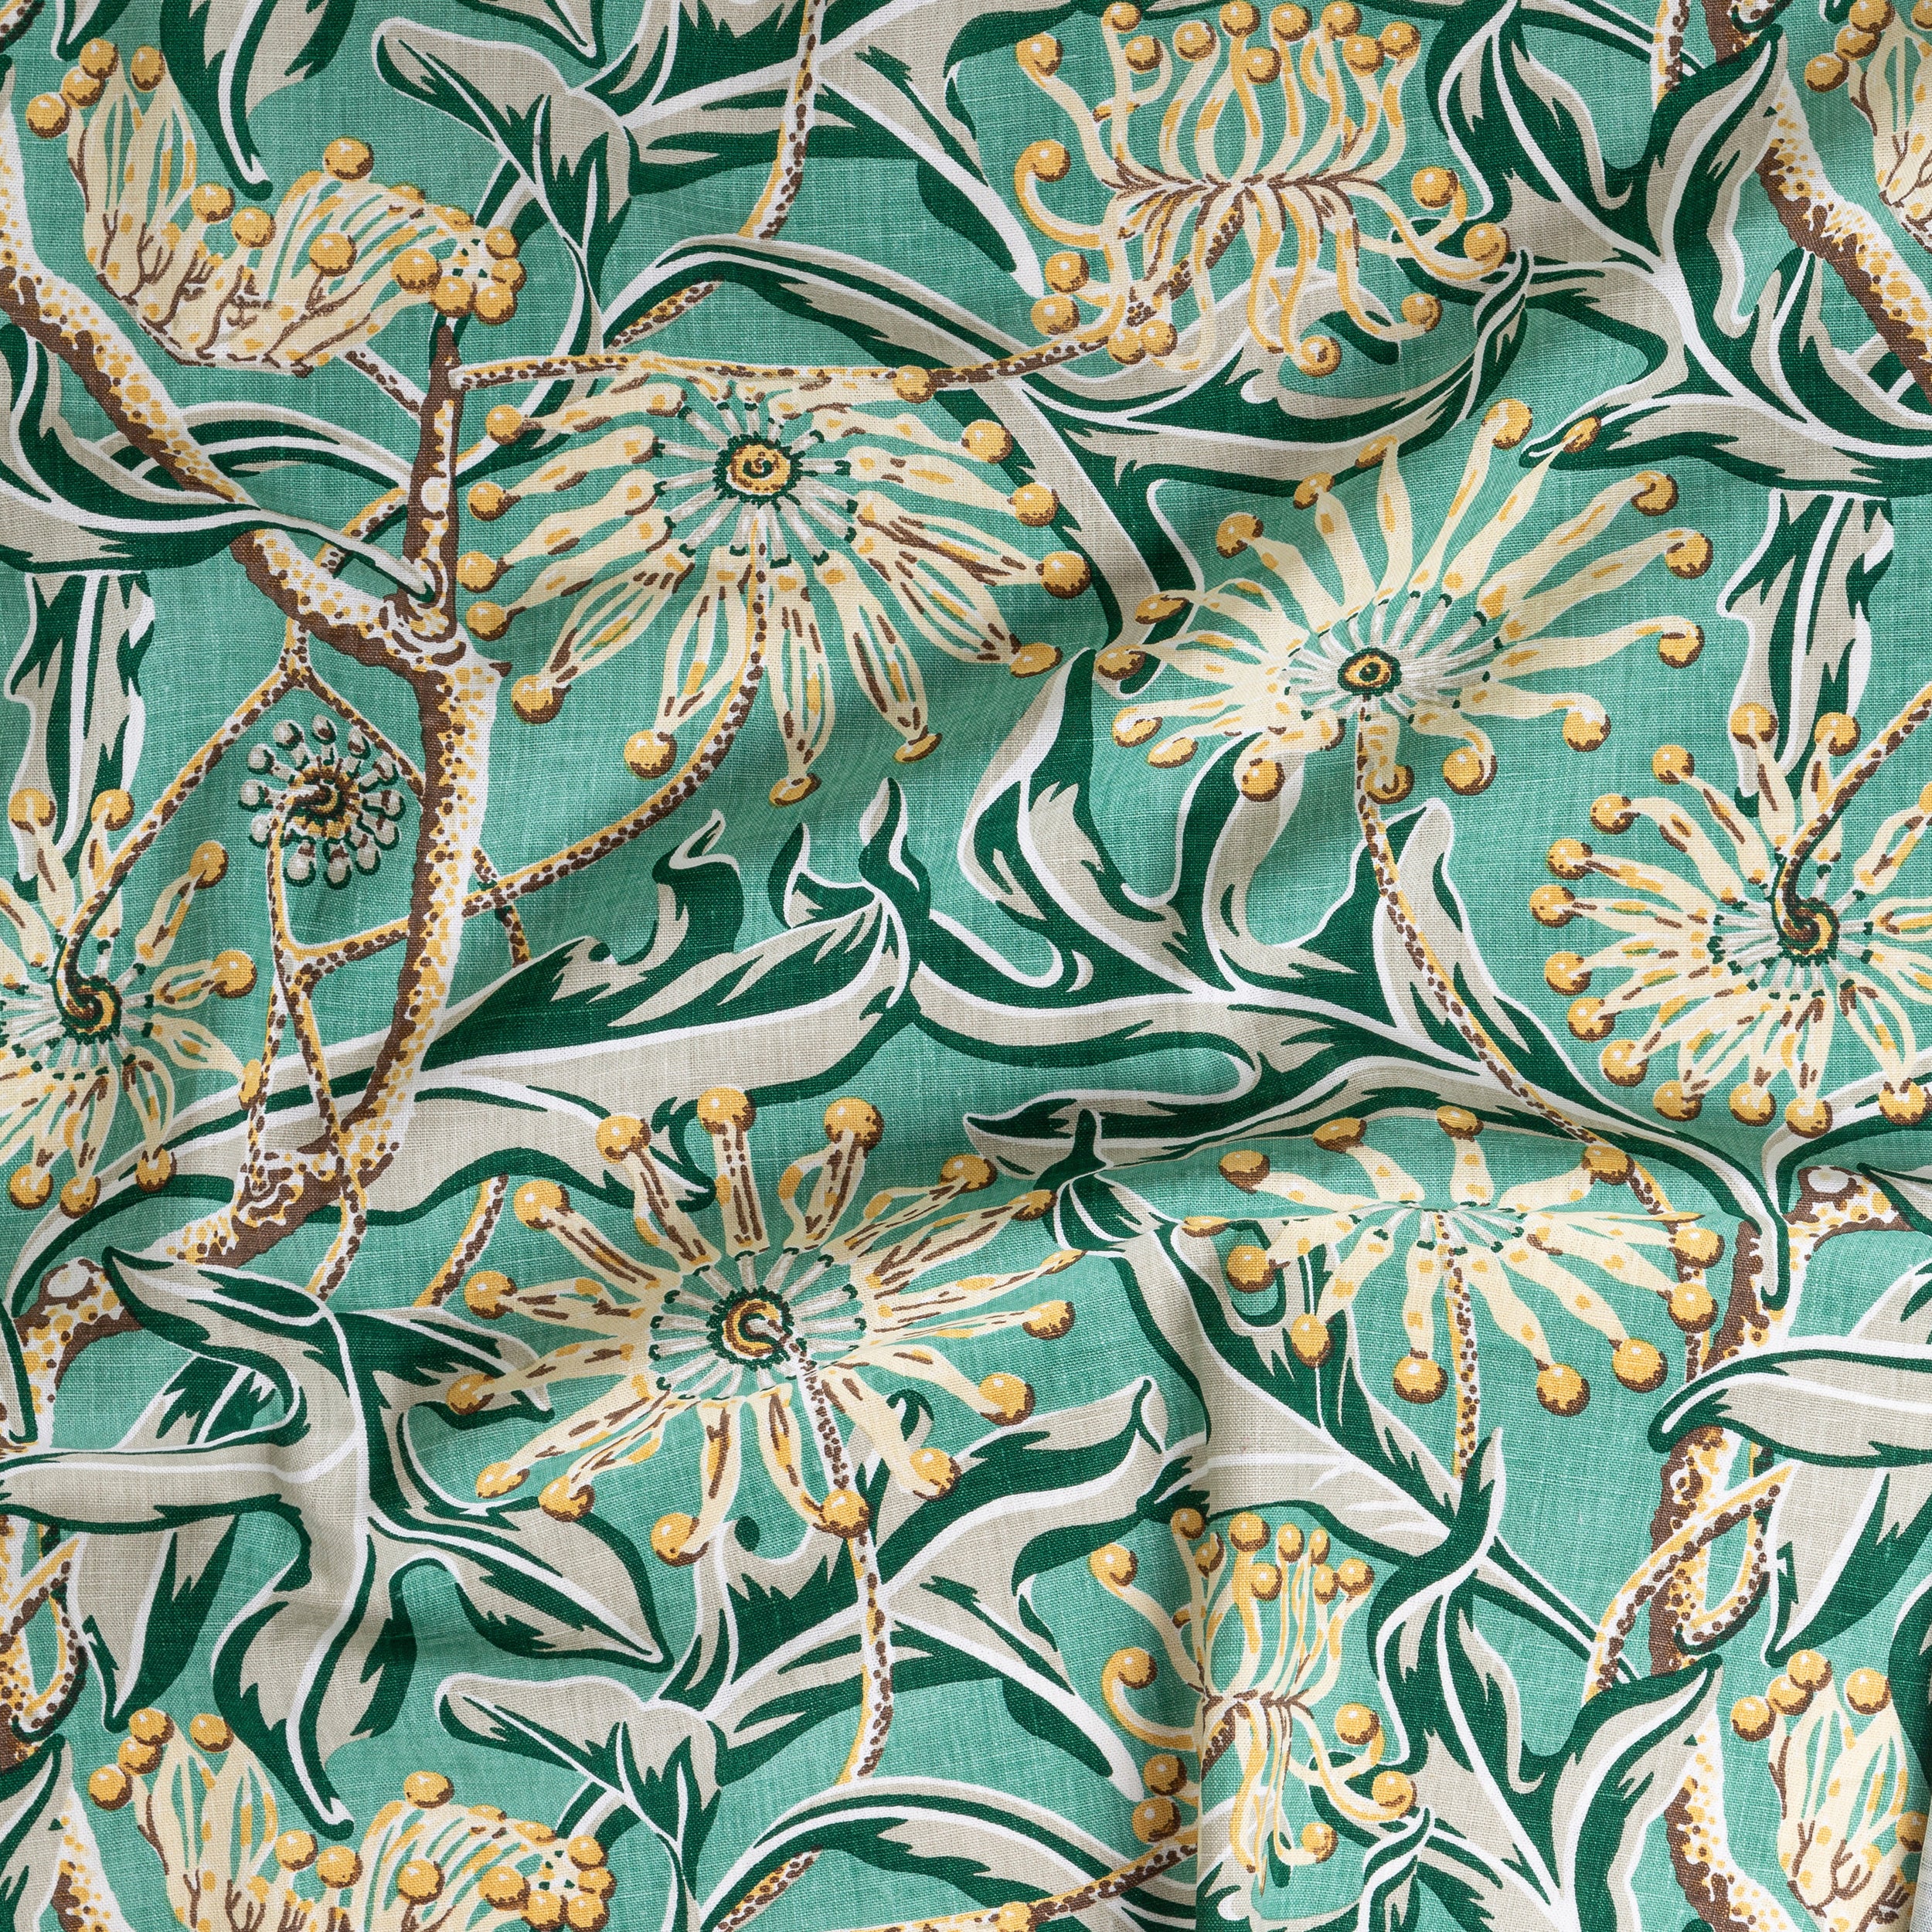 Draped fabric yardage in a large-scale floral print in green, brown and yellow on a turquoise field.